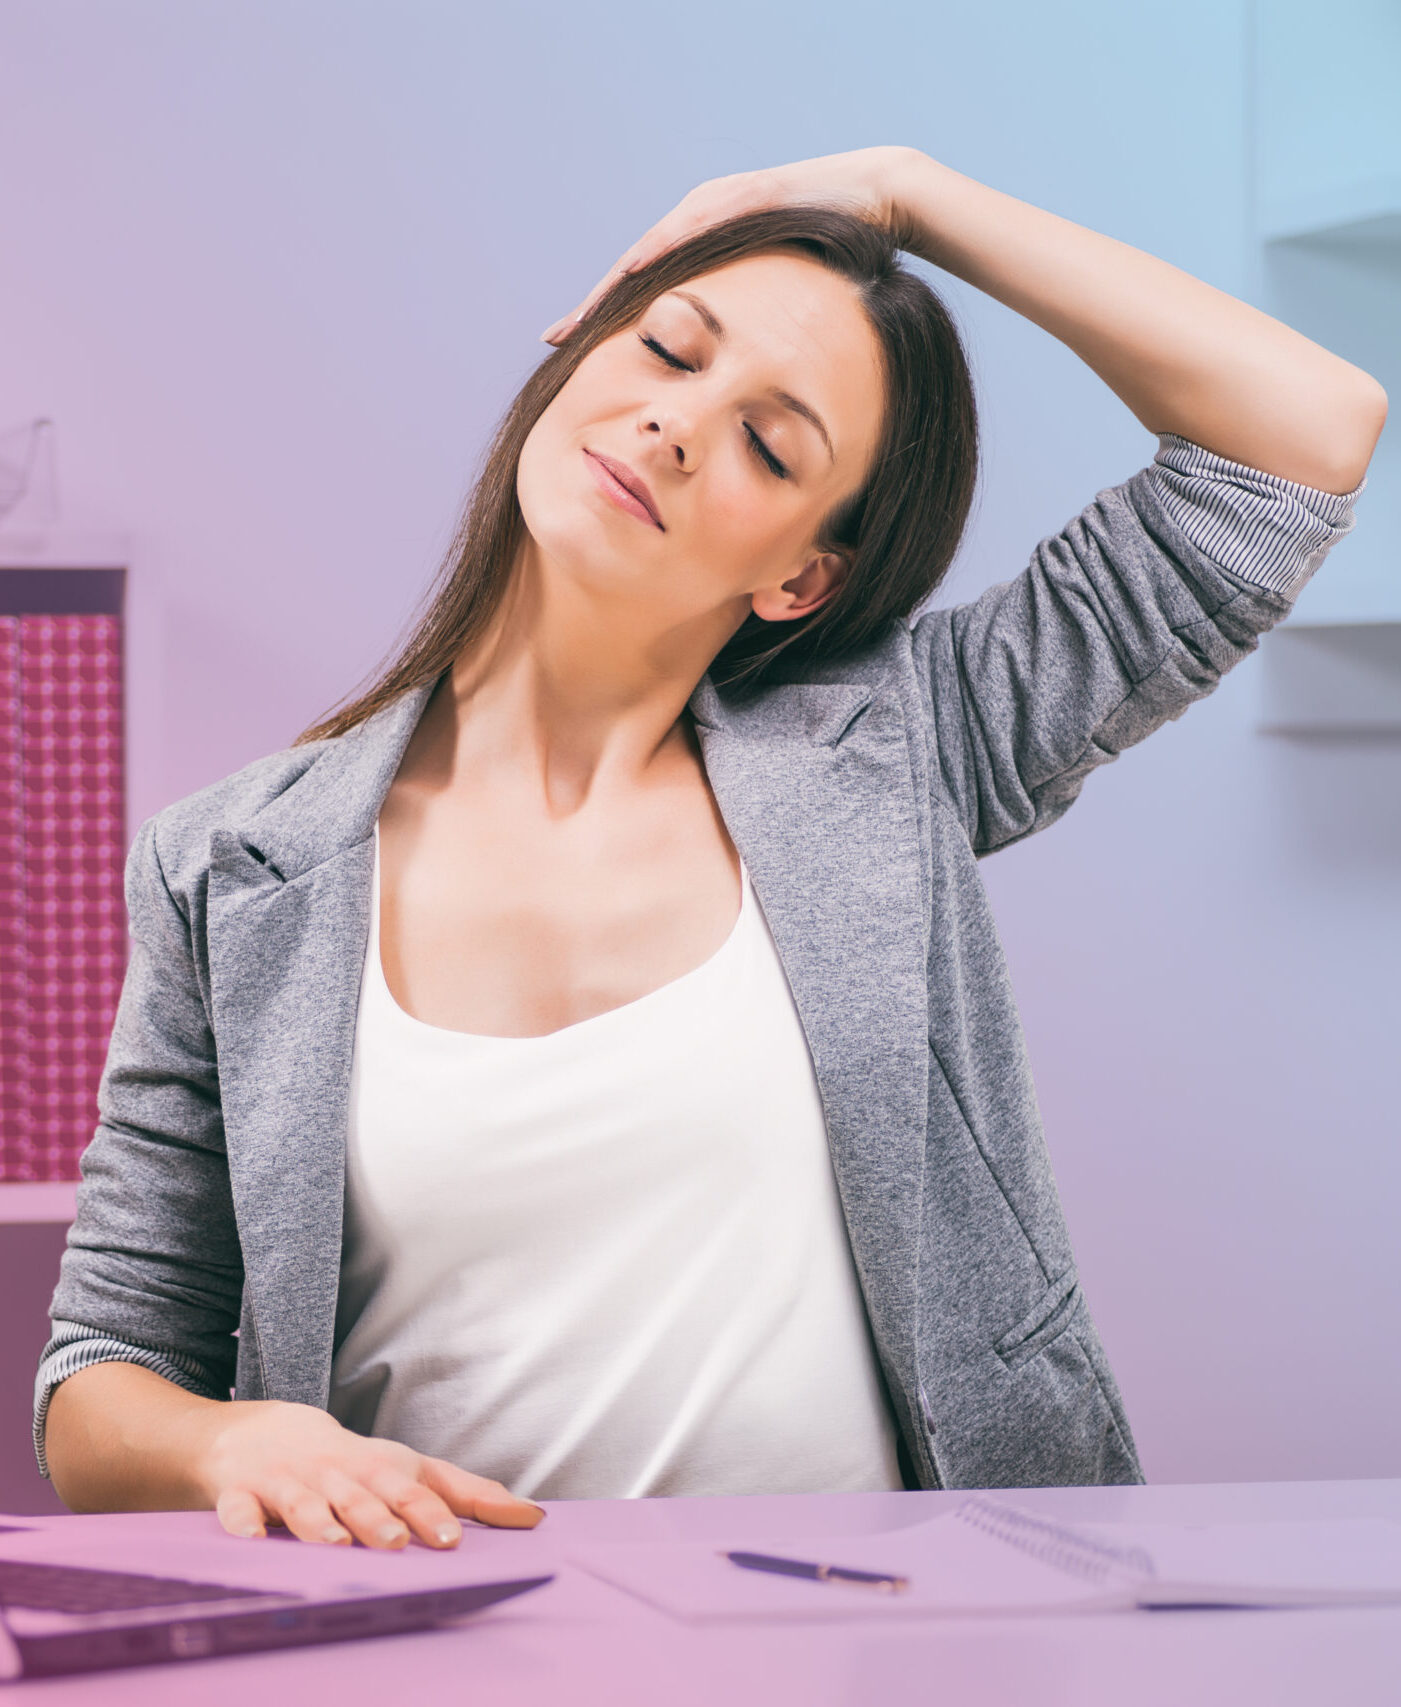 Woman practicing mindfulness by stretching at a desk